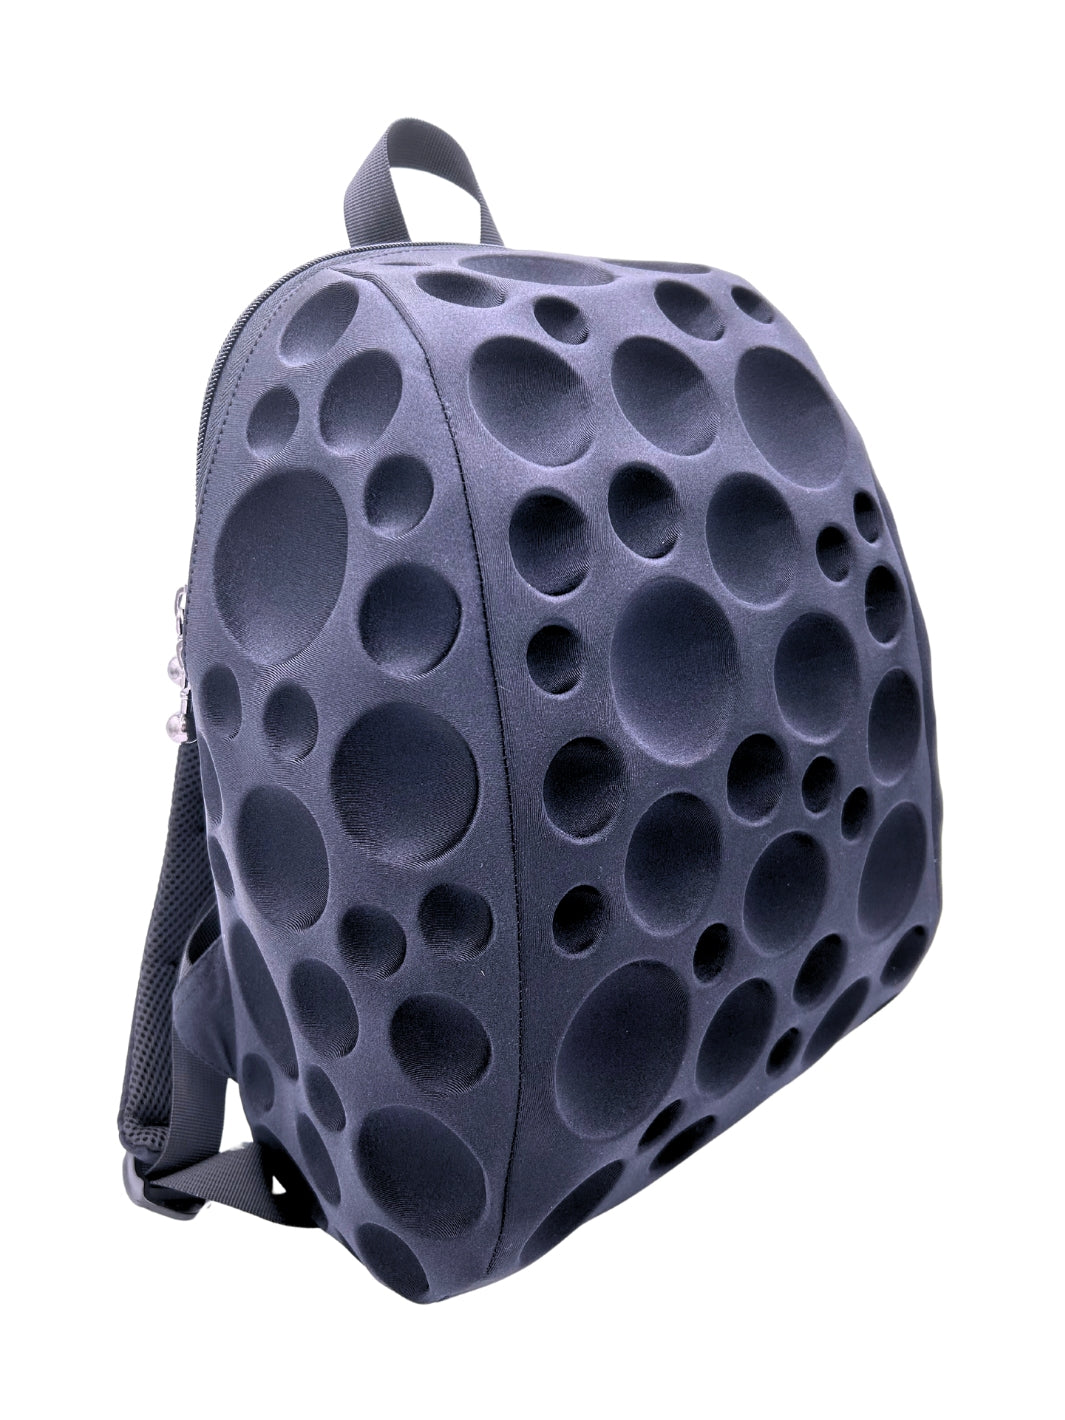 Daypack in Gray | Moonshot Daypack by Madpax Front View